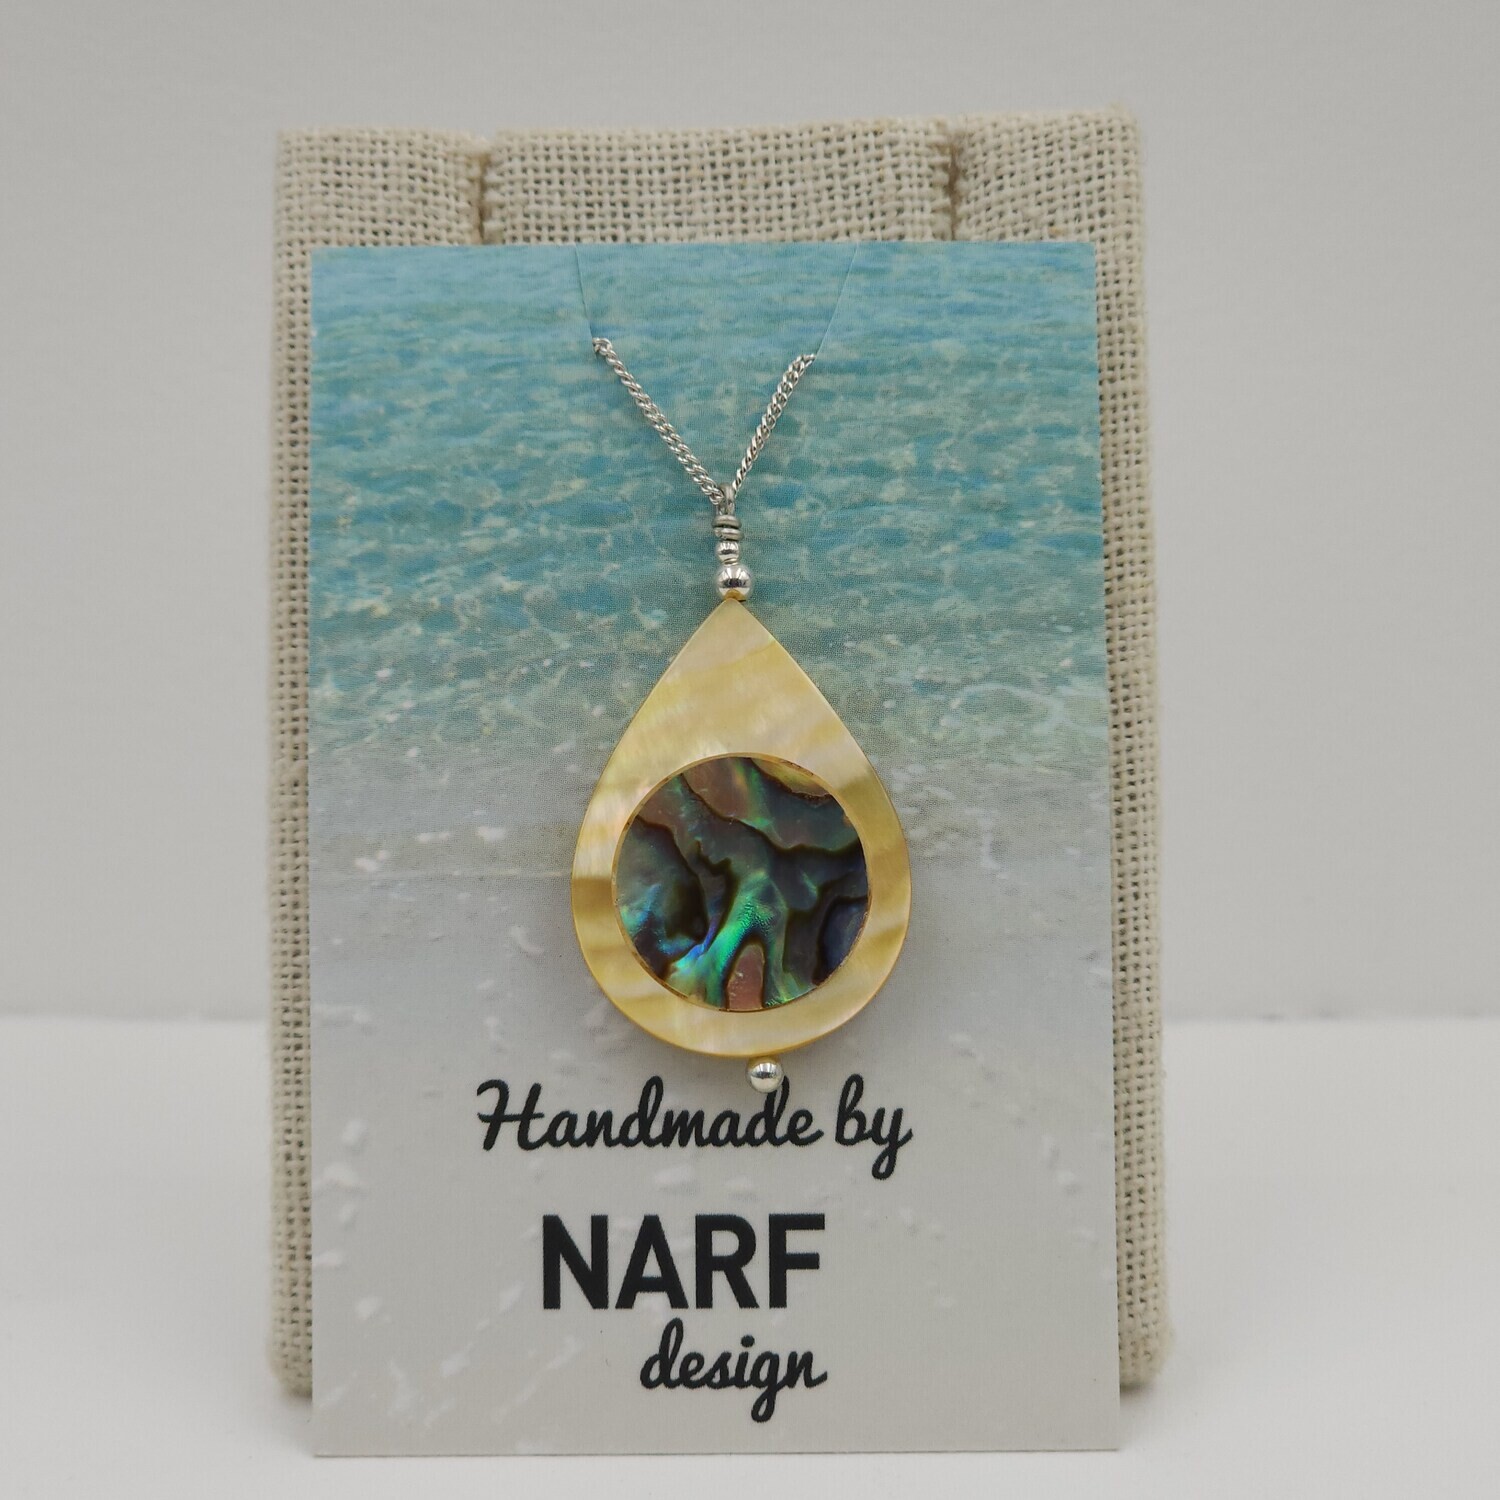 Mother of Pearl Teardrop with Abalone Inlay Necklace